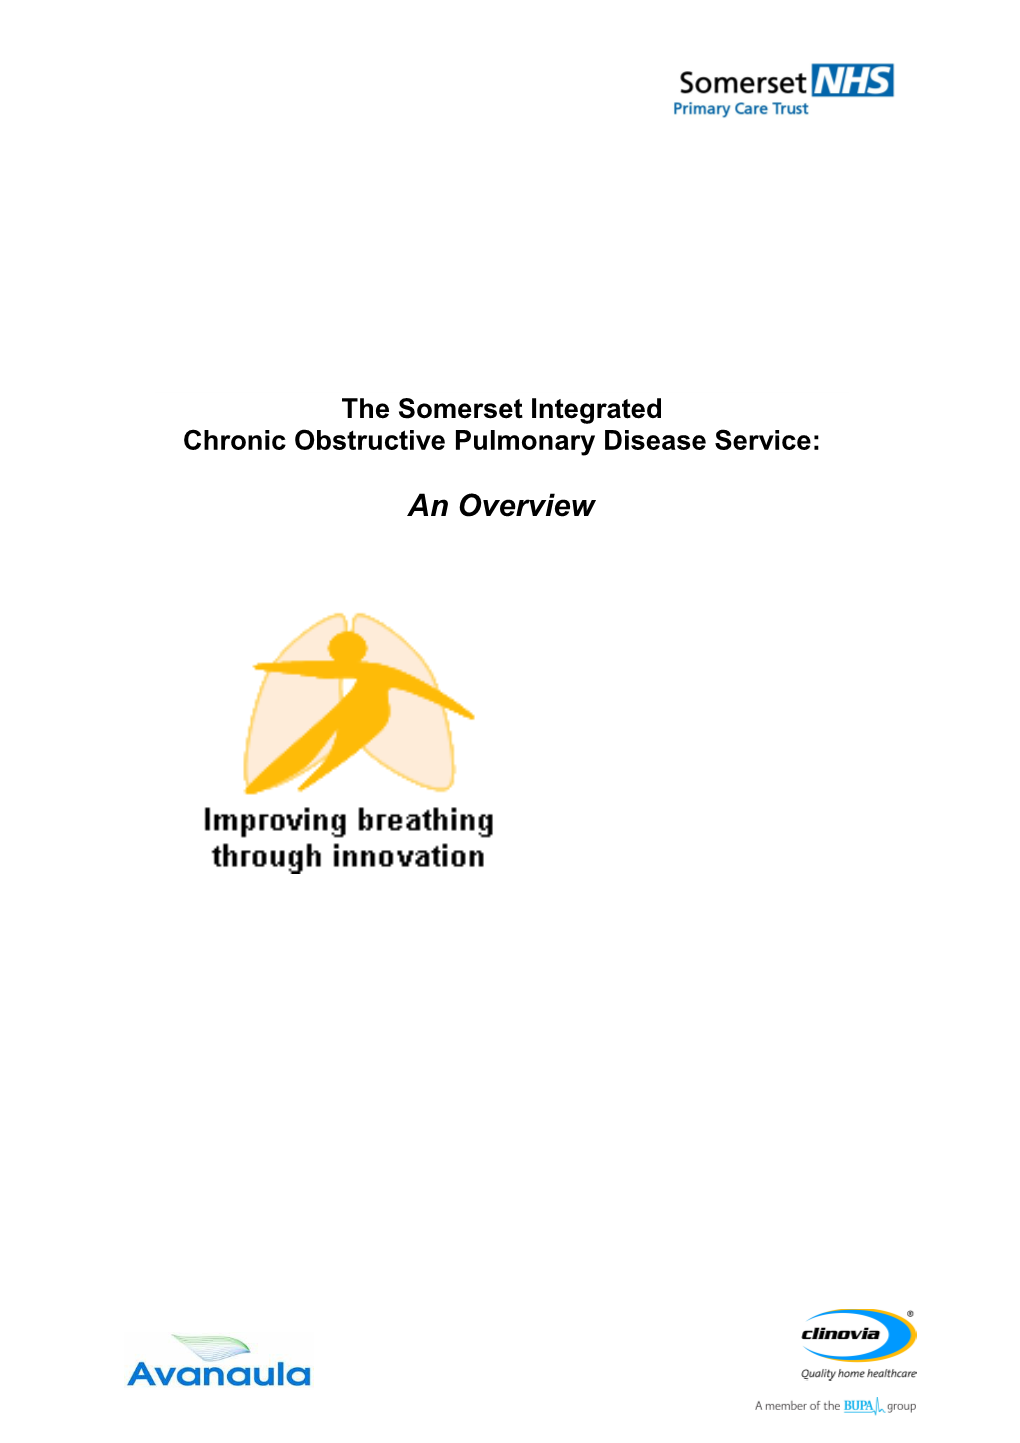 The Somerset Integrated COPD Service